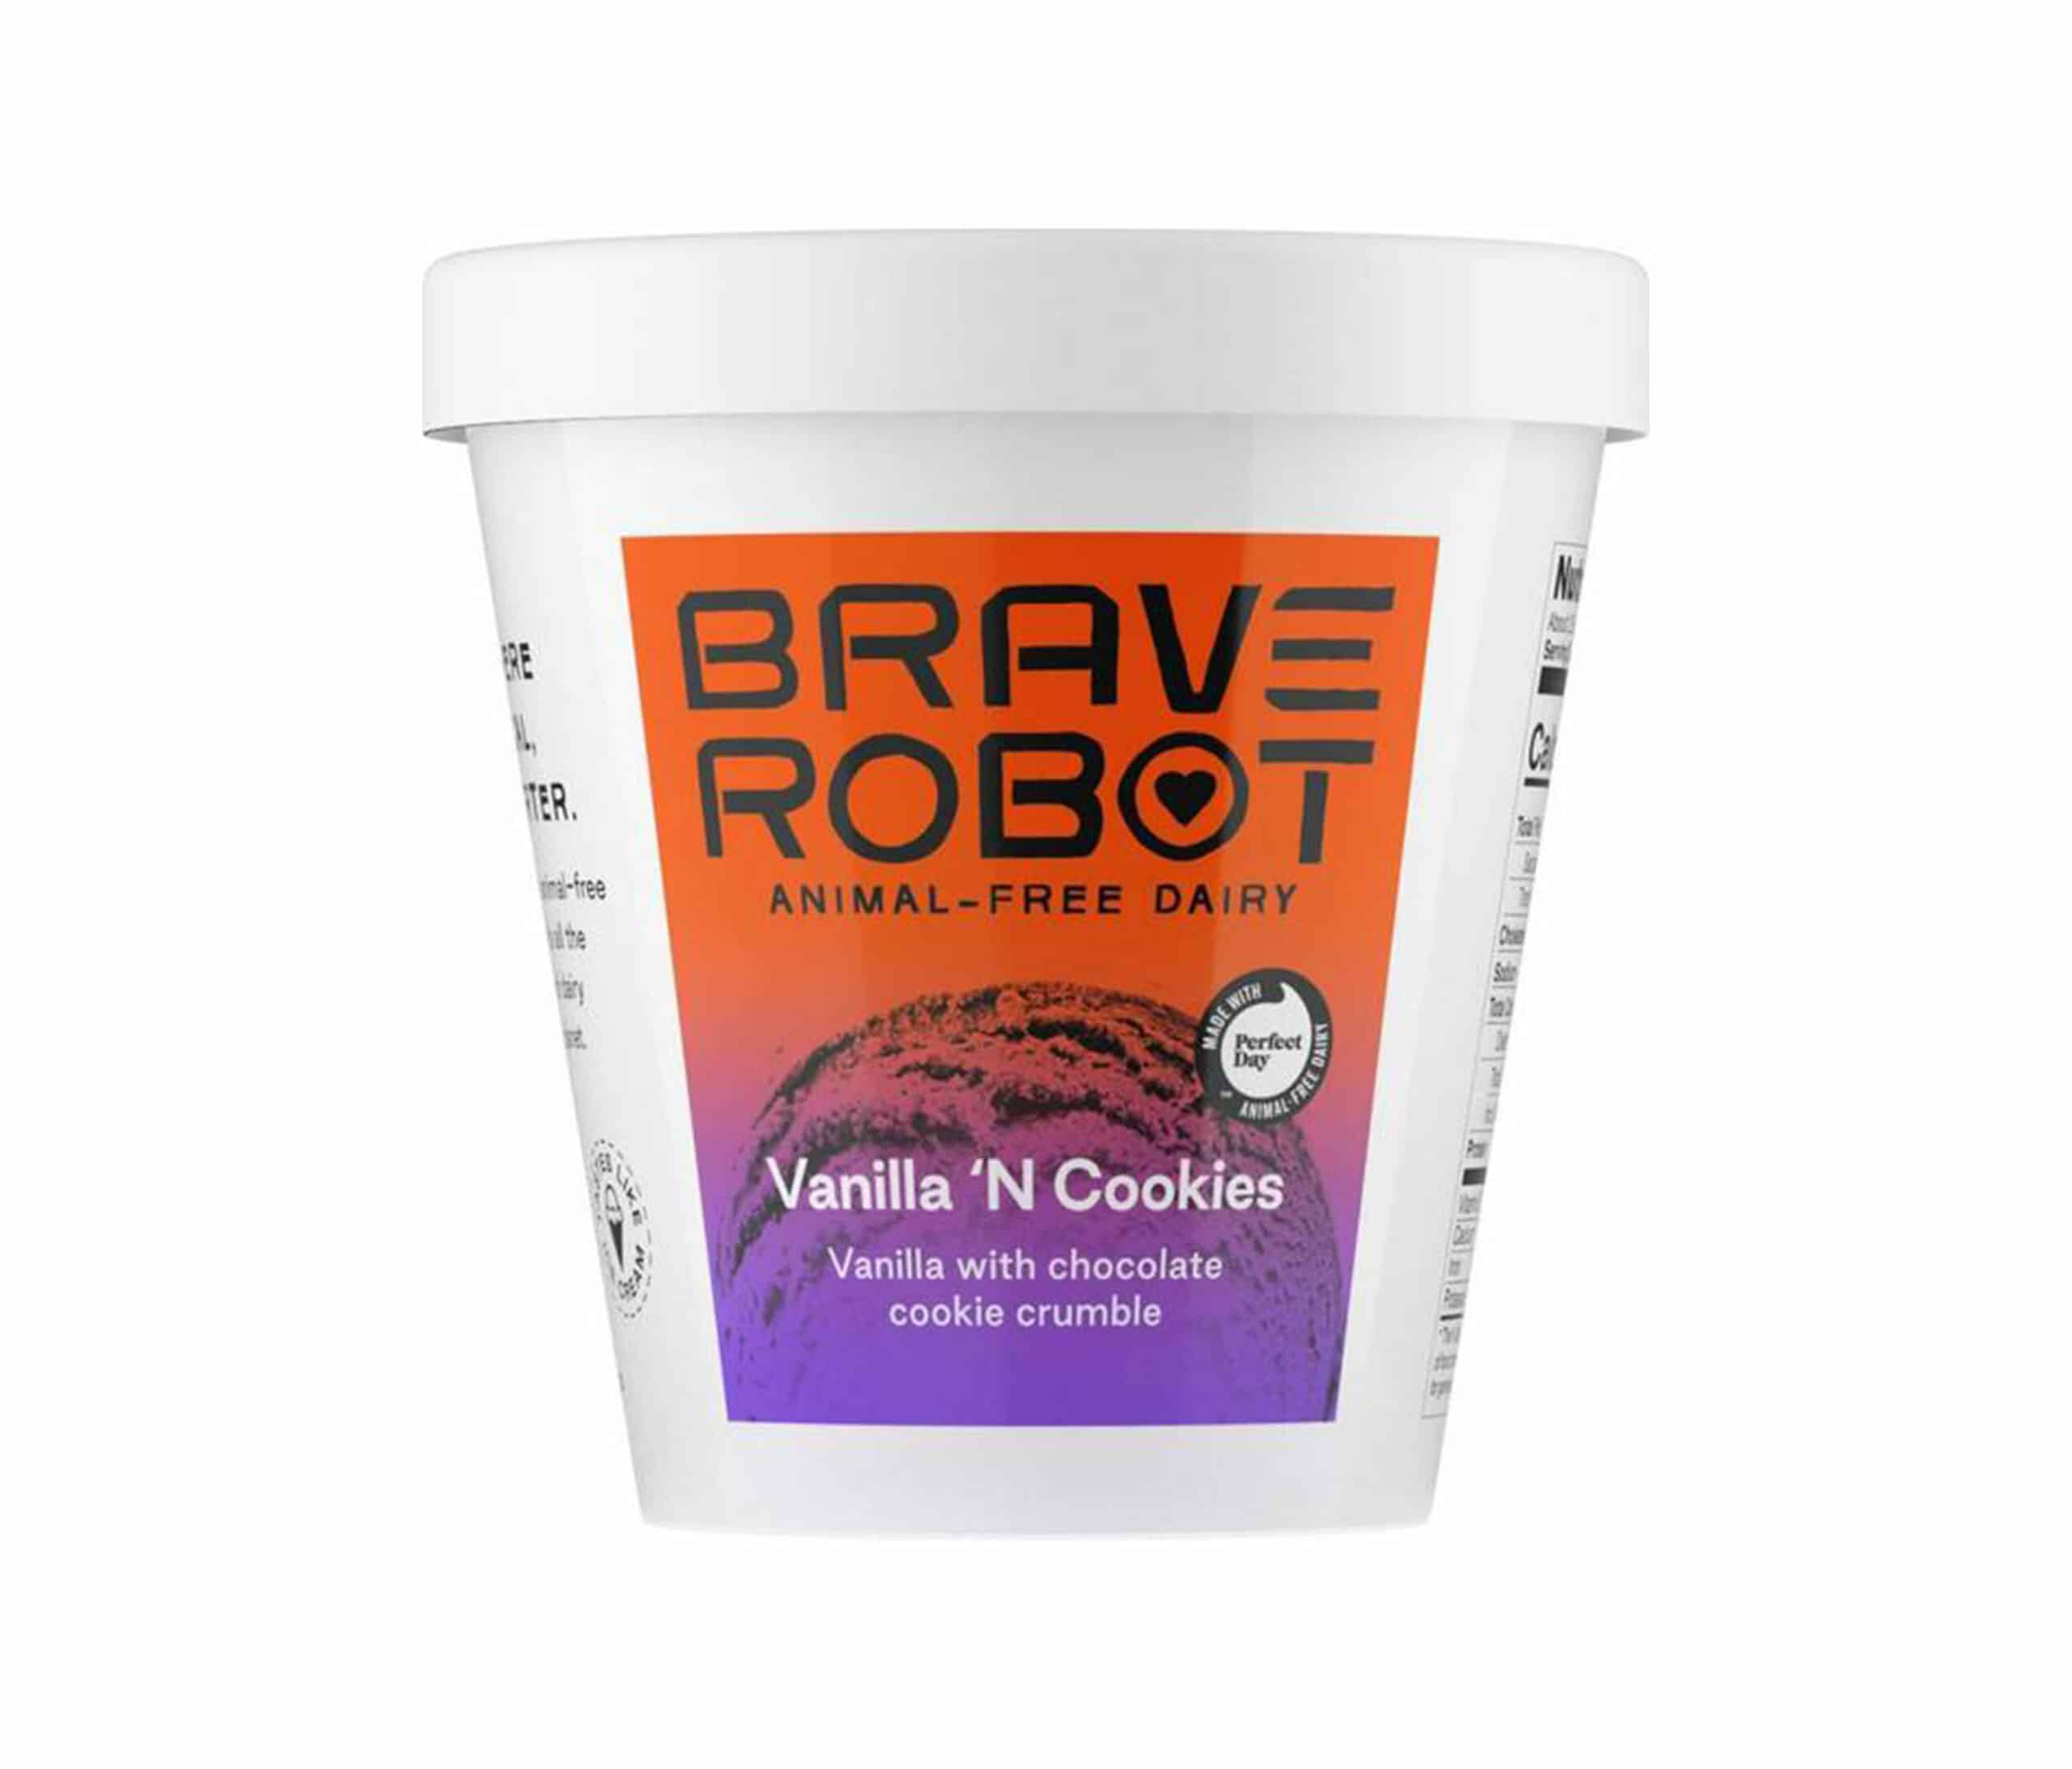 is brave robot dairy free